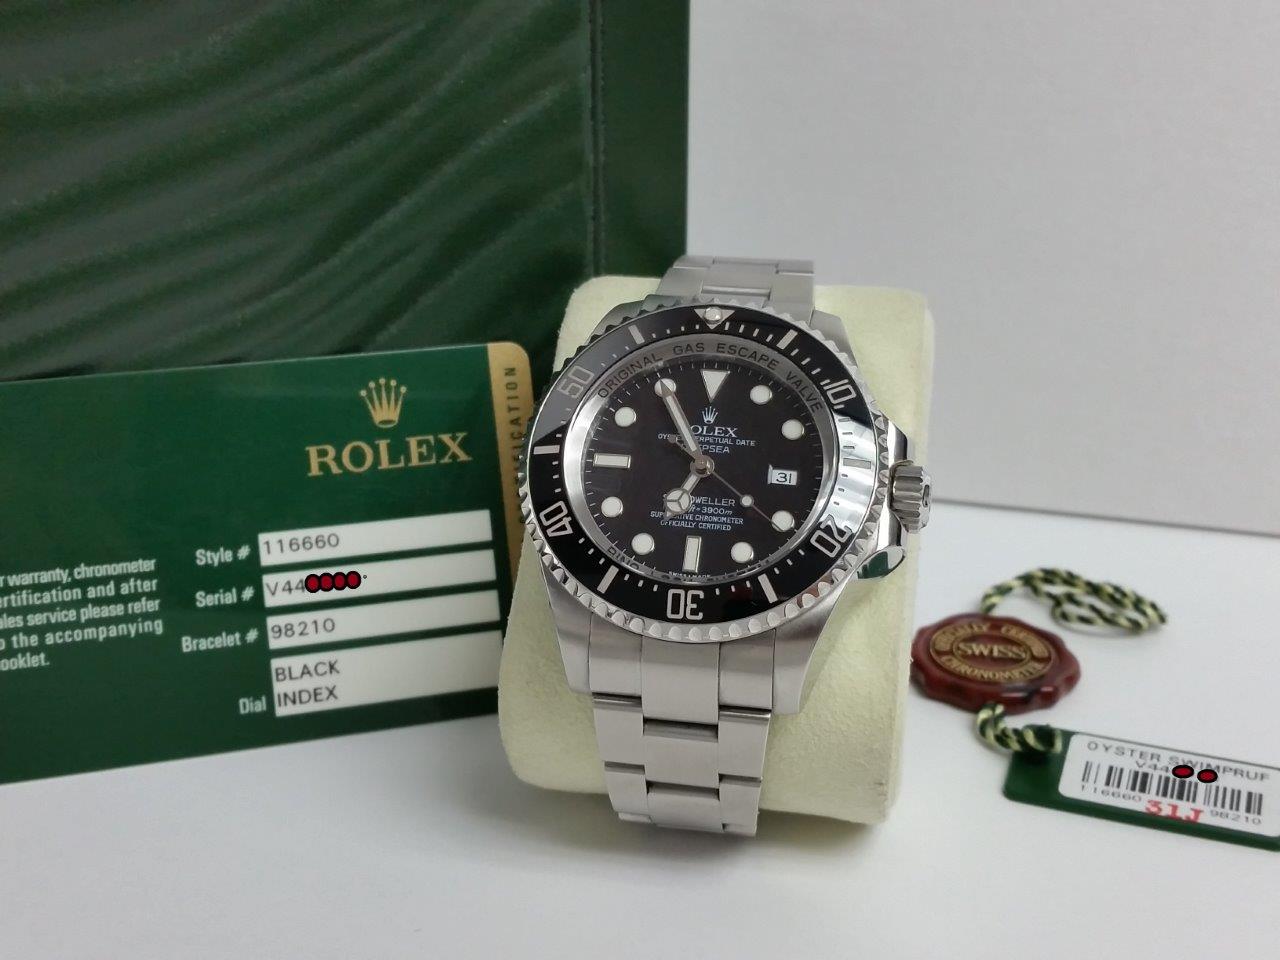 Rolex Oyster Perpetual DEEPSEA SEA-DWELLER 3900M Black Box Papers 116660 V